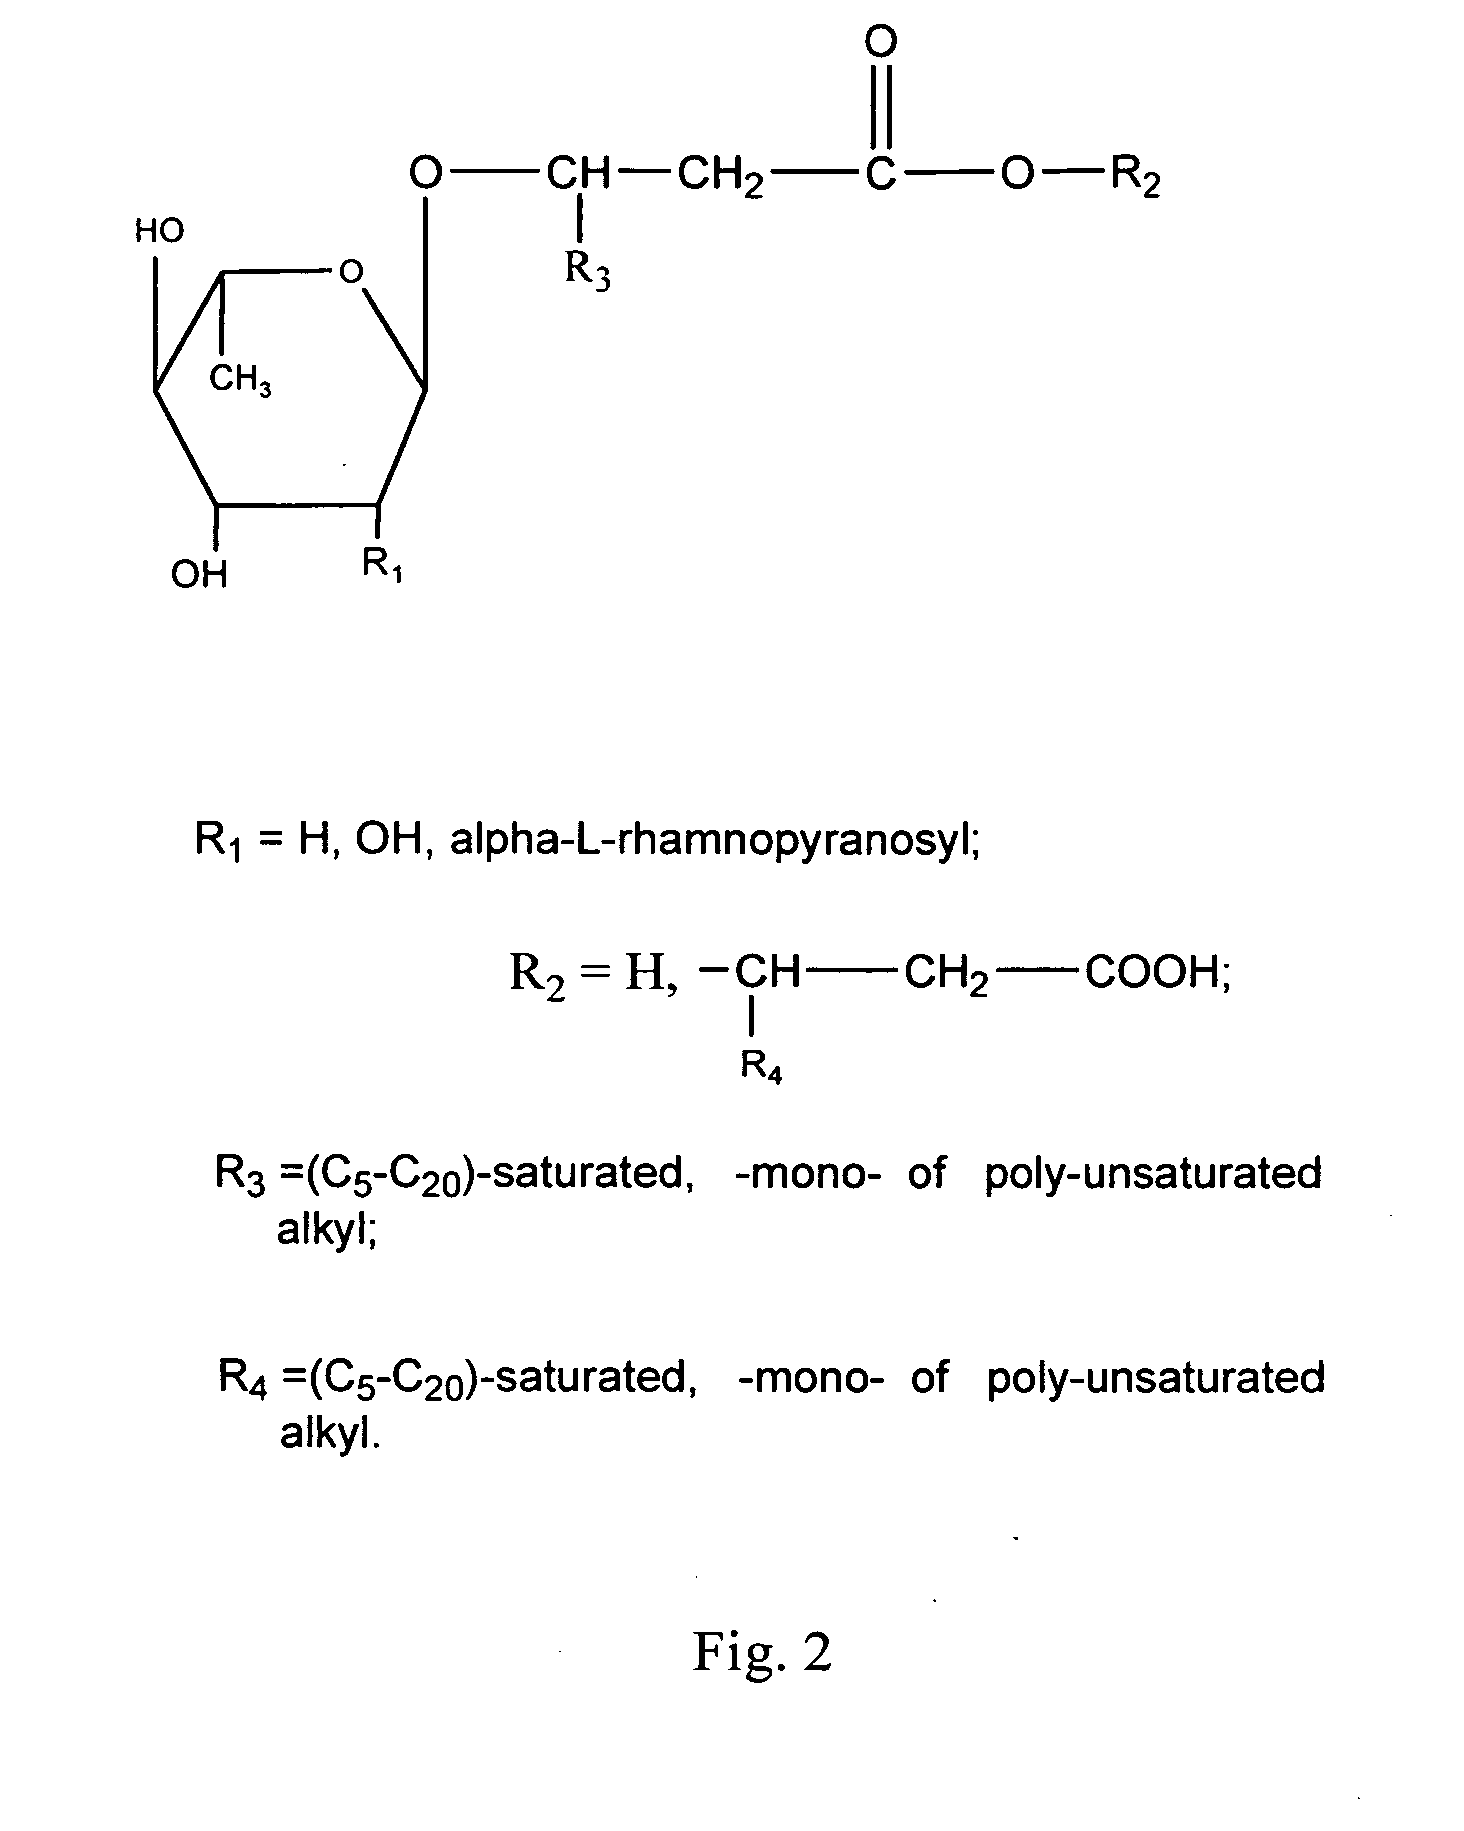 Antimycotic rhamnolipid compositions and related methods of use